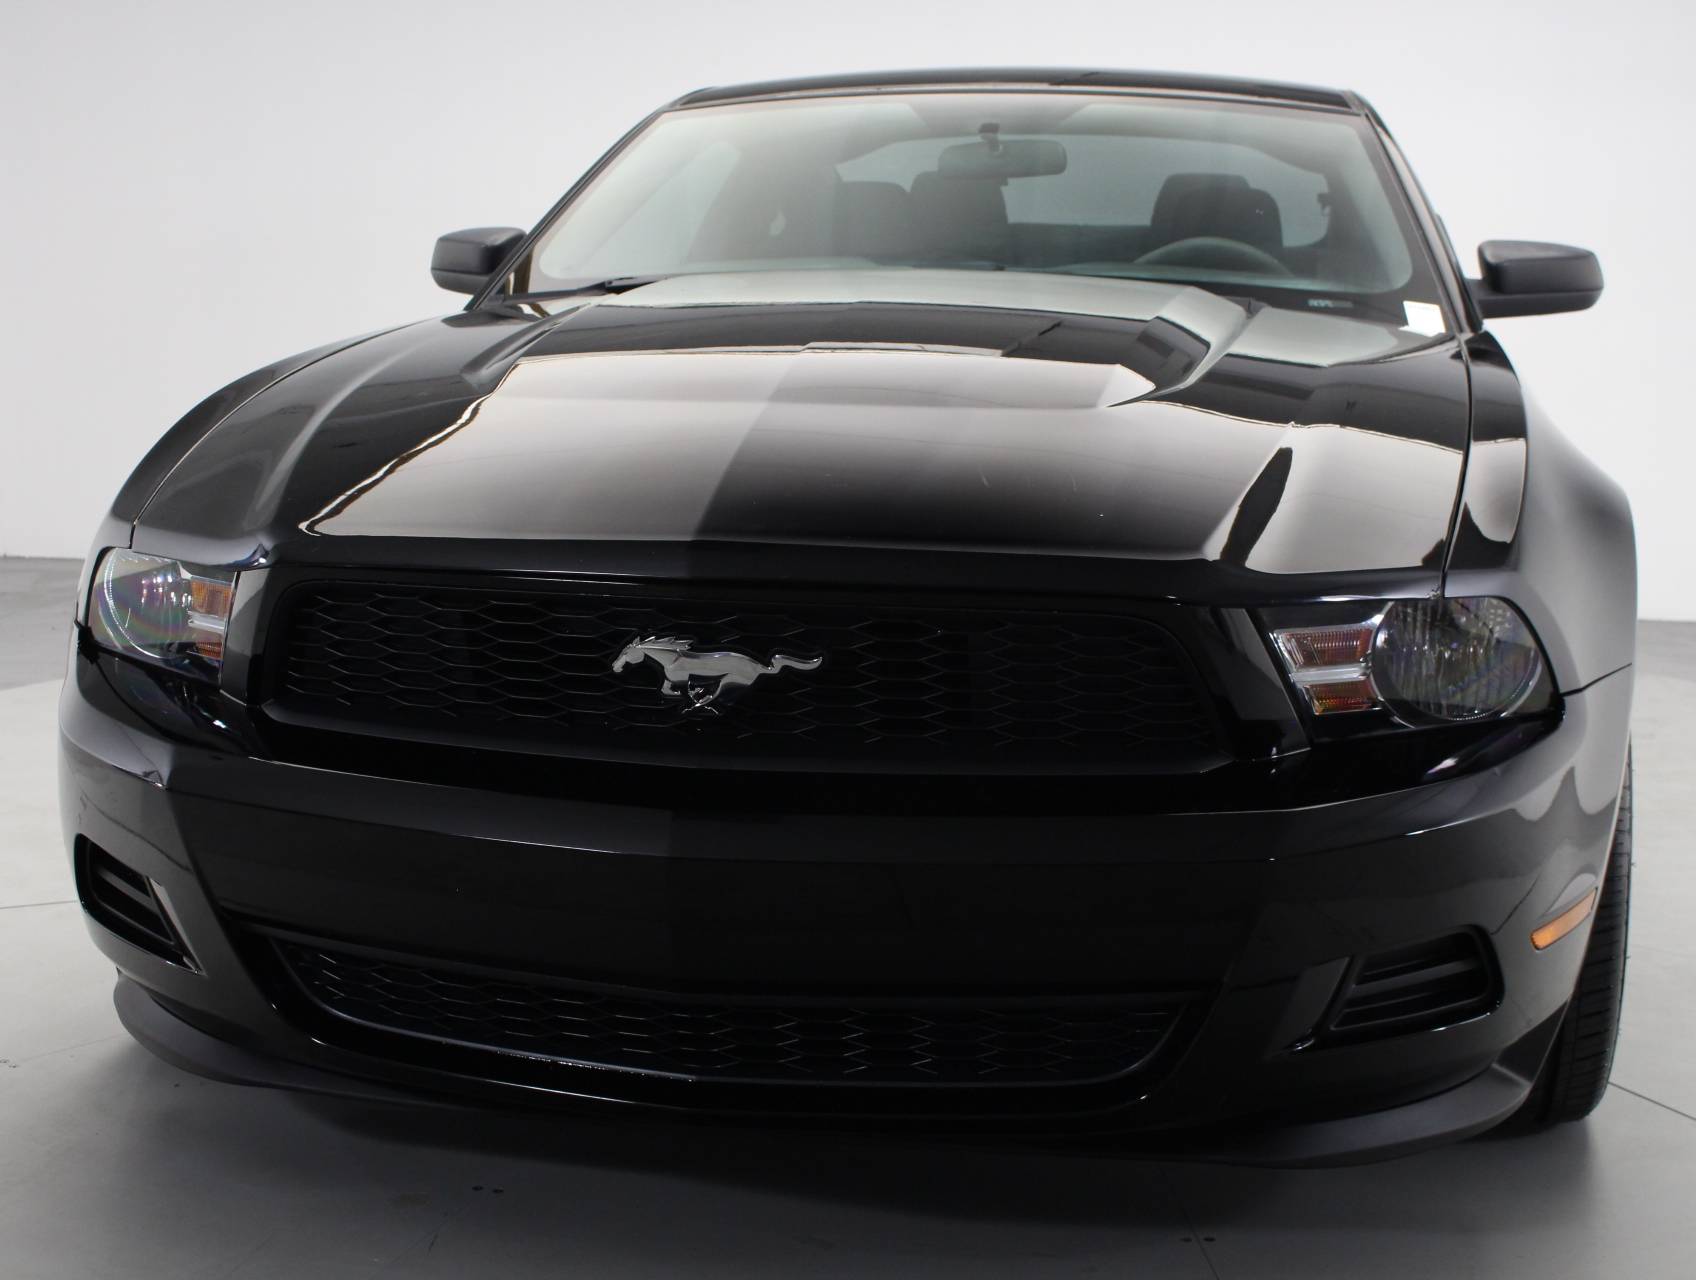 Florida Fine Cars - Used FORD MUSTANG 2012 MIAMI BASE